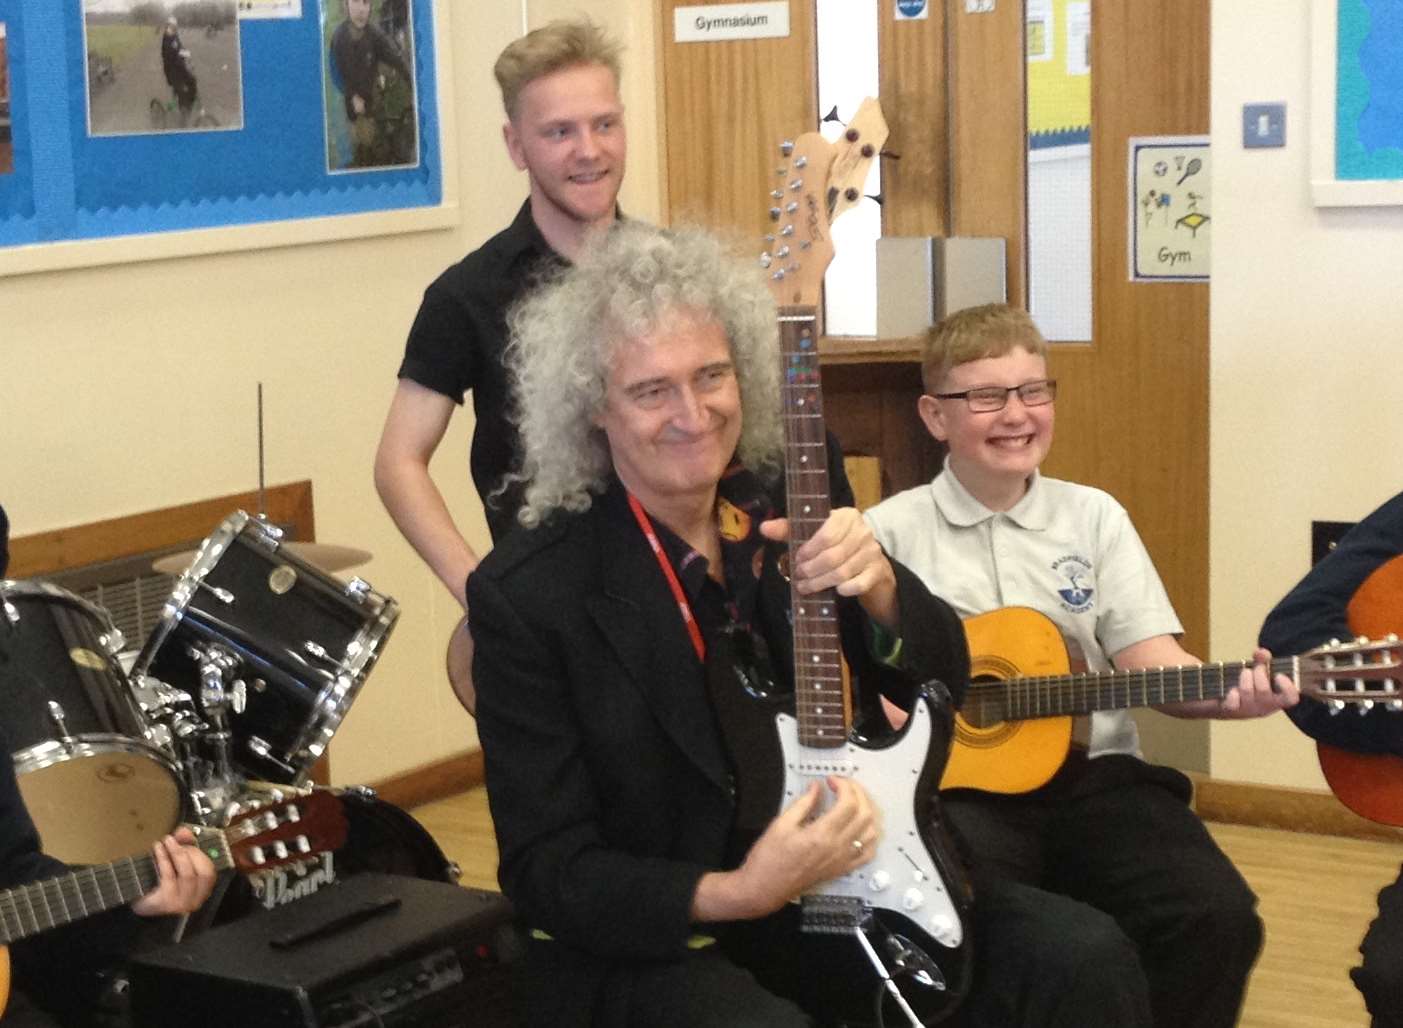 Rock legend Brian May forms a new band with Bradfields Academy pupils